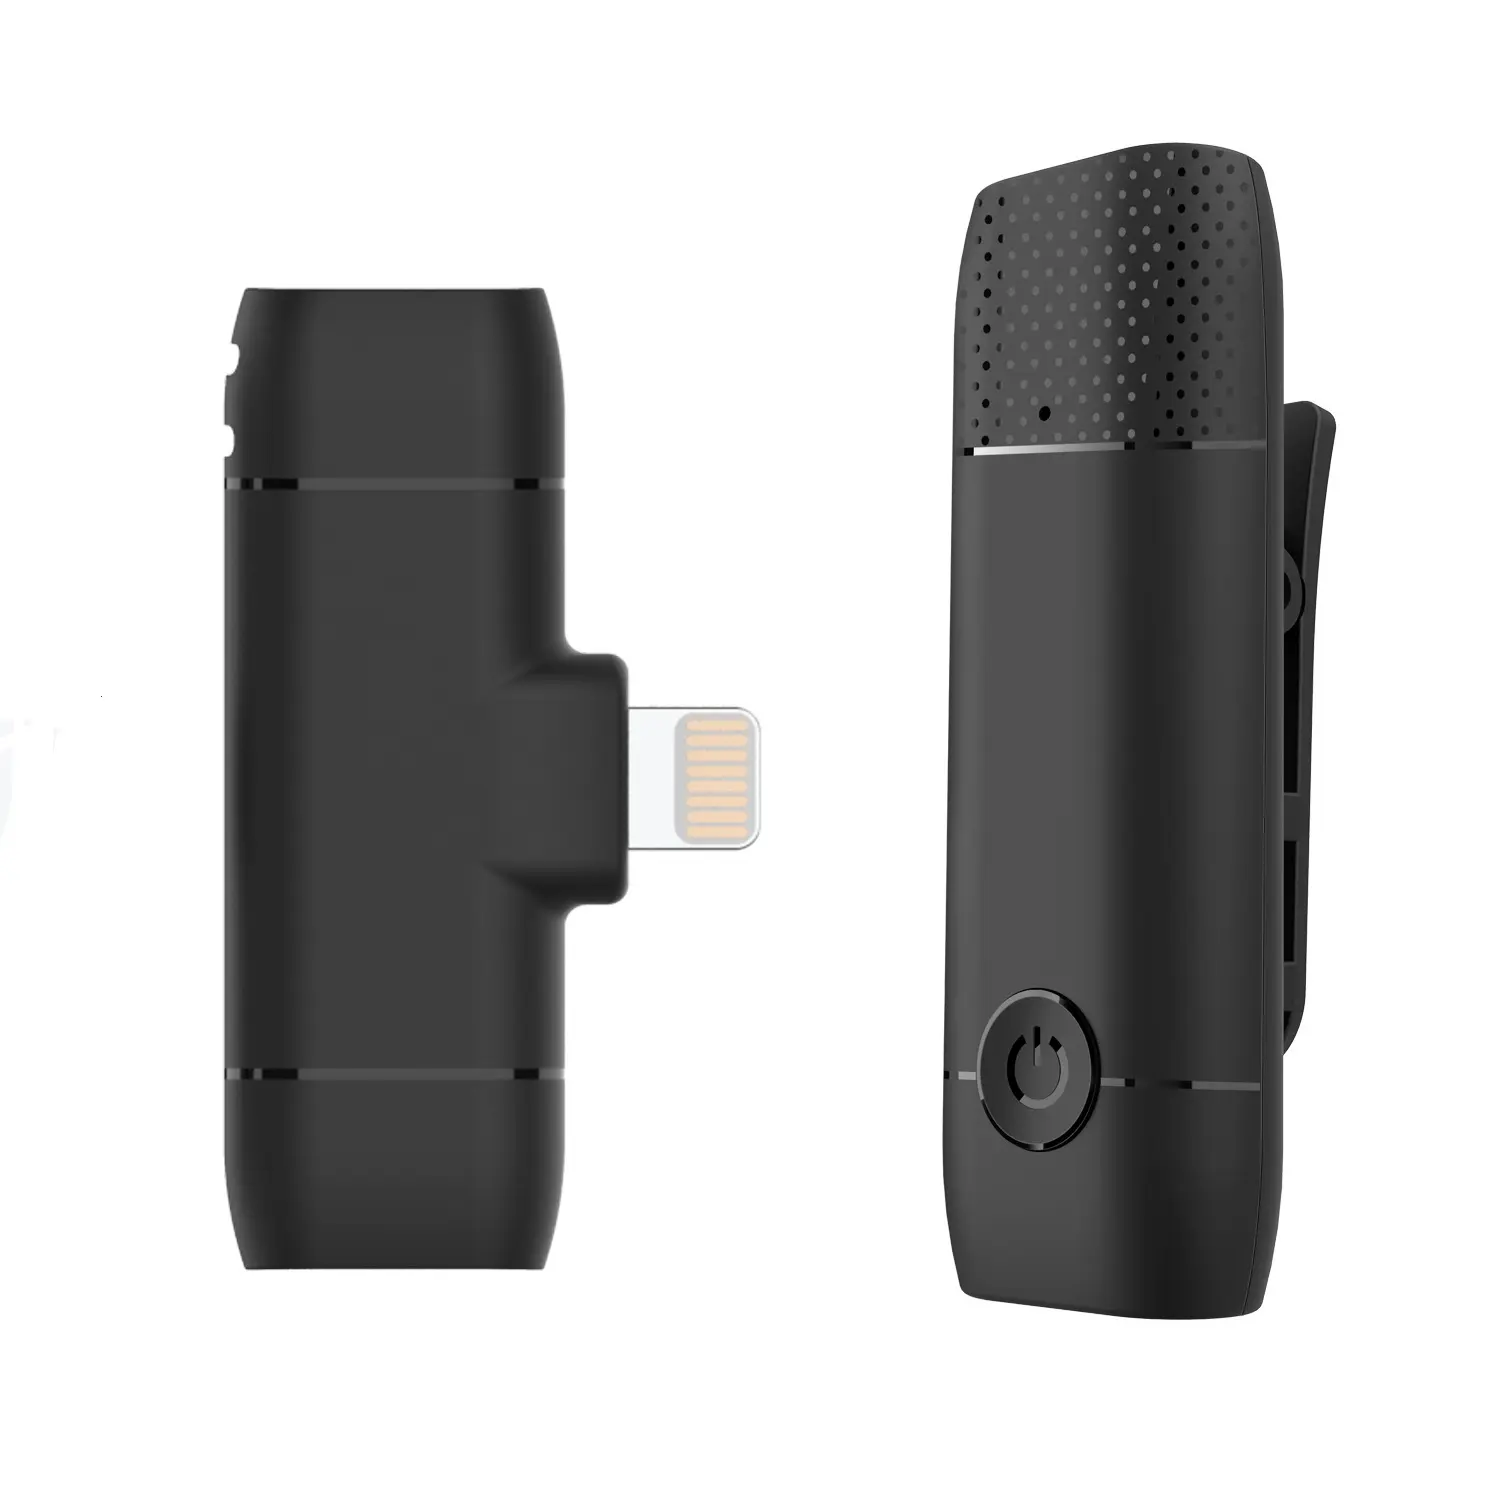 Live Show Broadcast Interview Vlog Short Video 2.4G Mini Portable Wireless Lapel Clip Microphone For Iphone